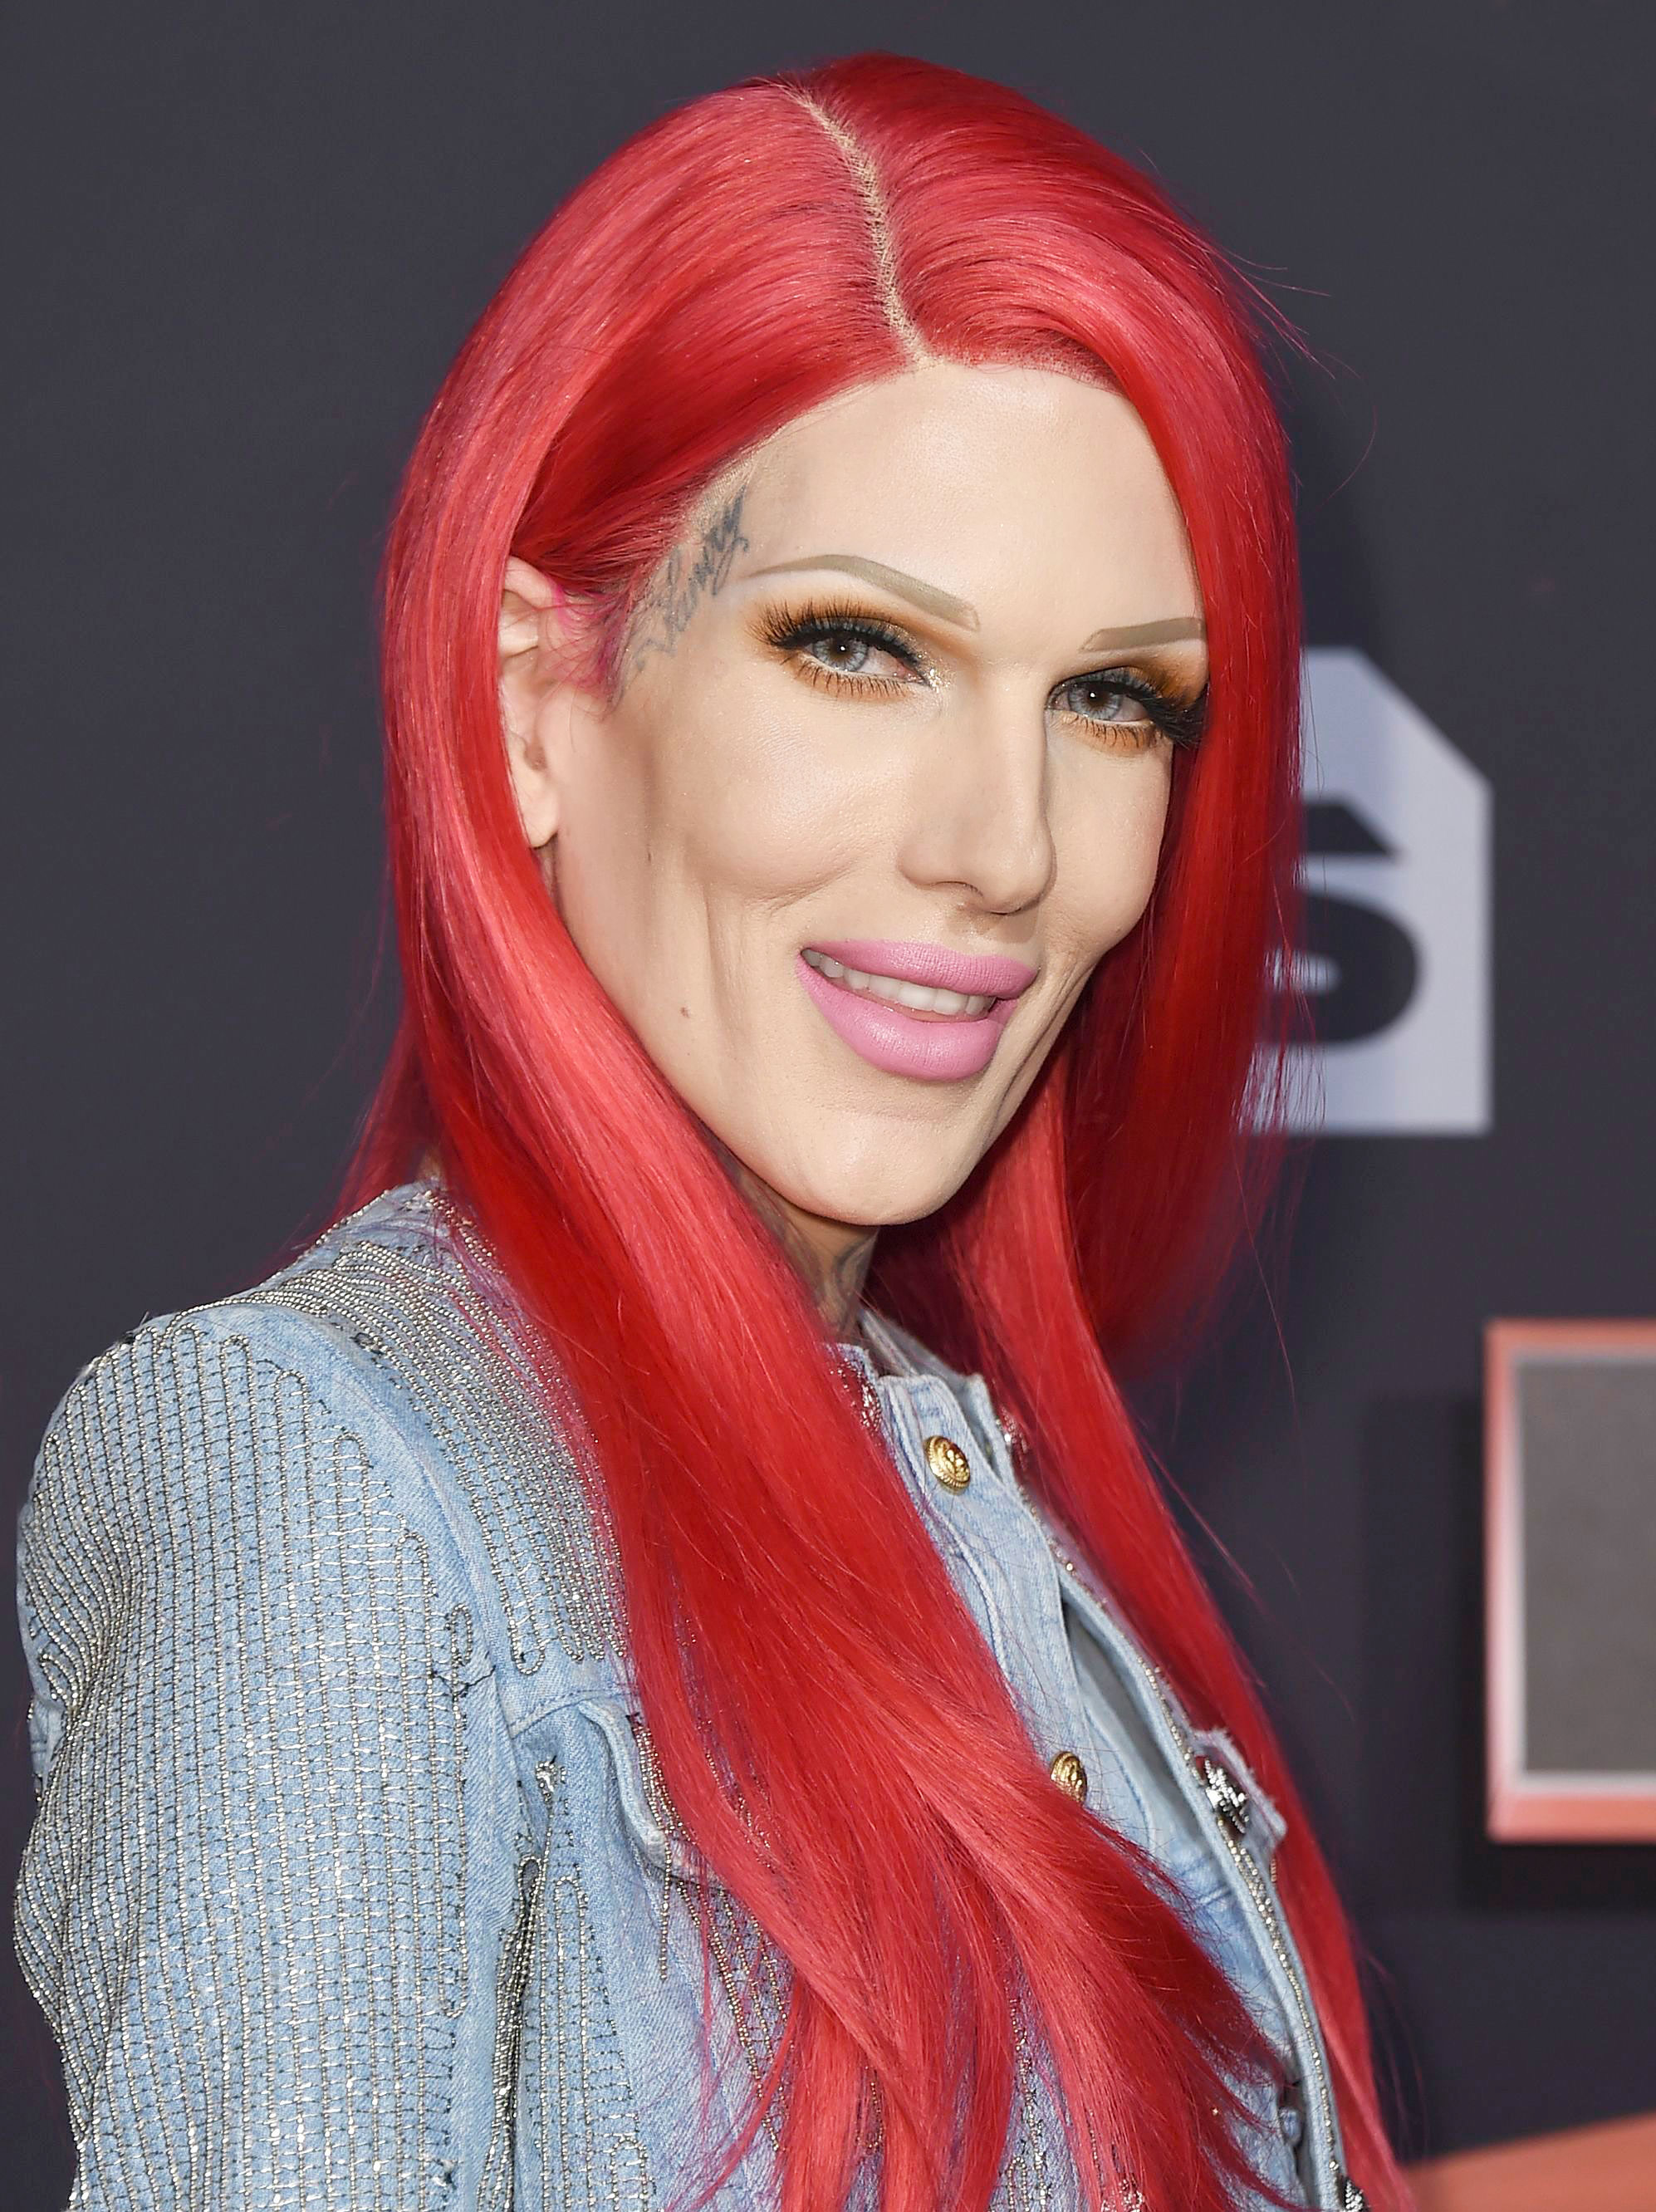 Jeffree Star Gets Botox Injections for 